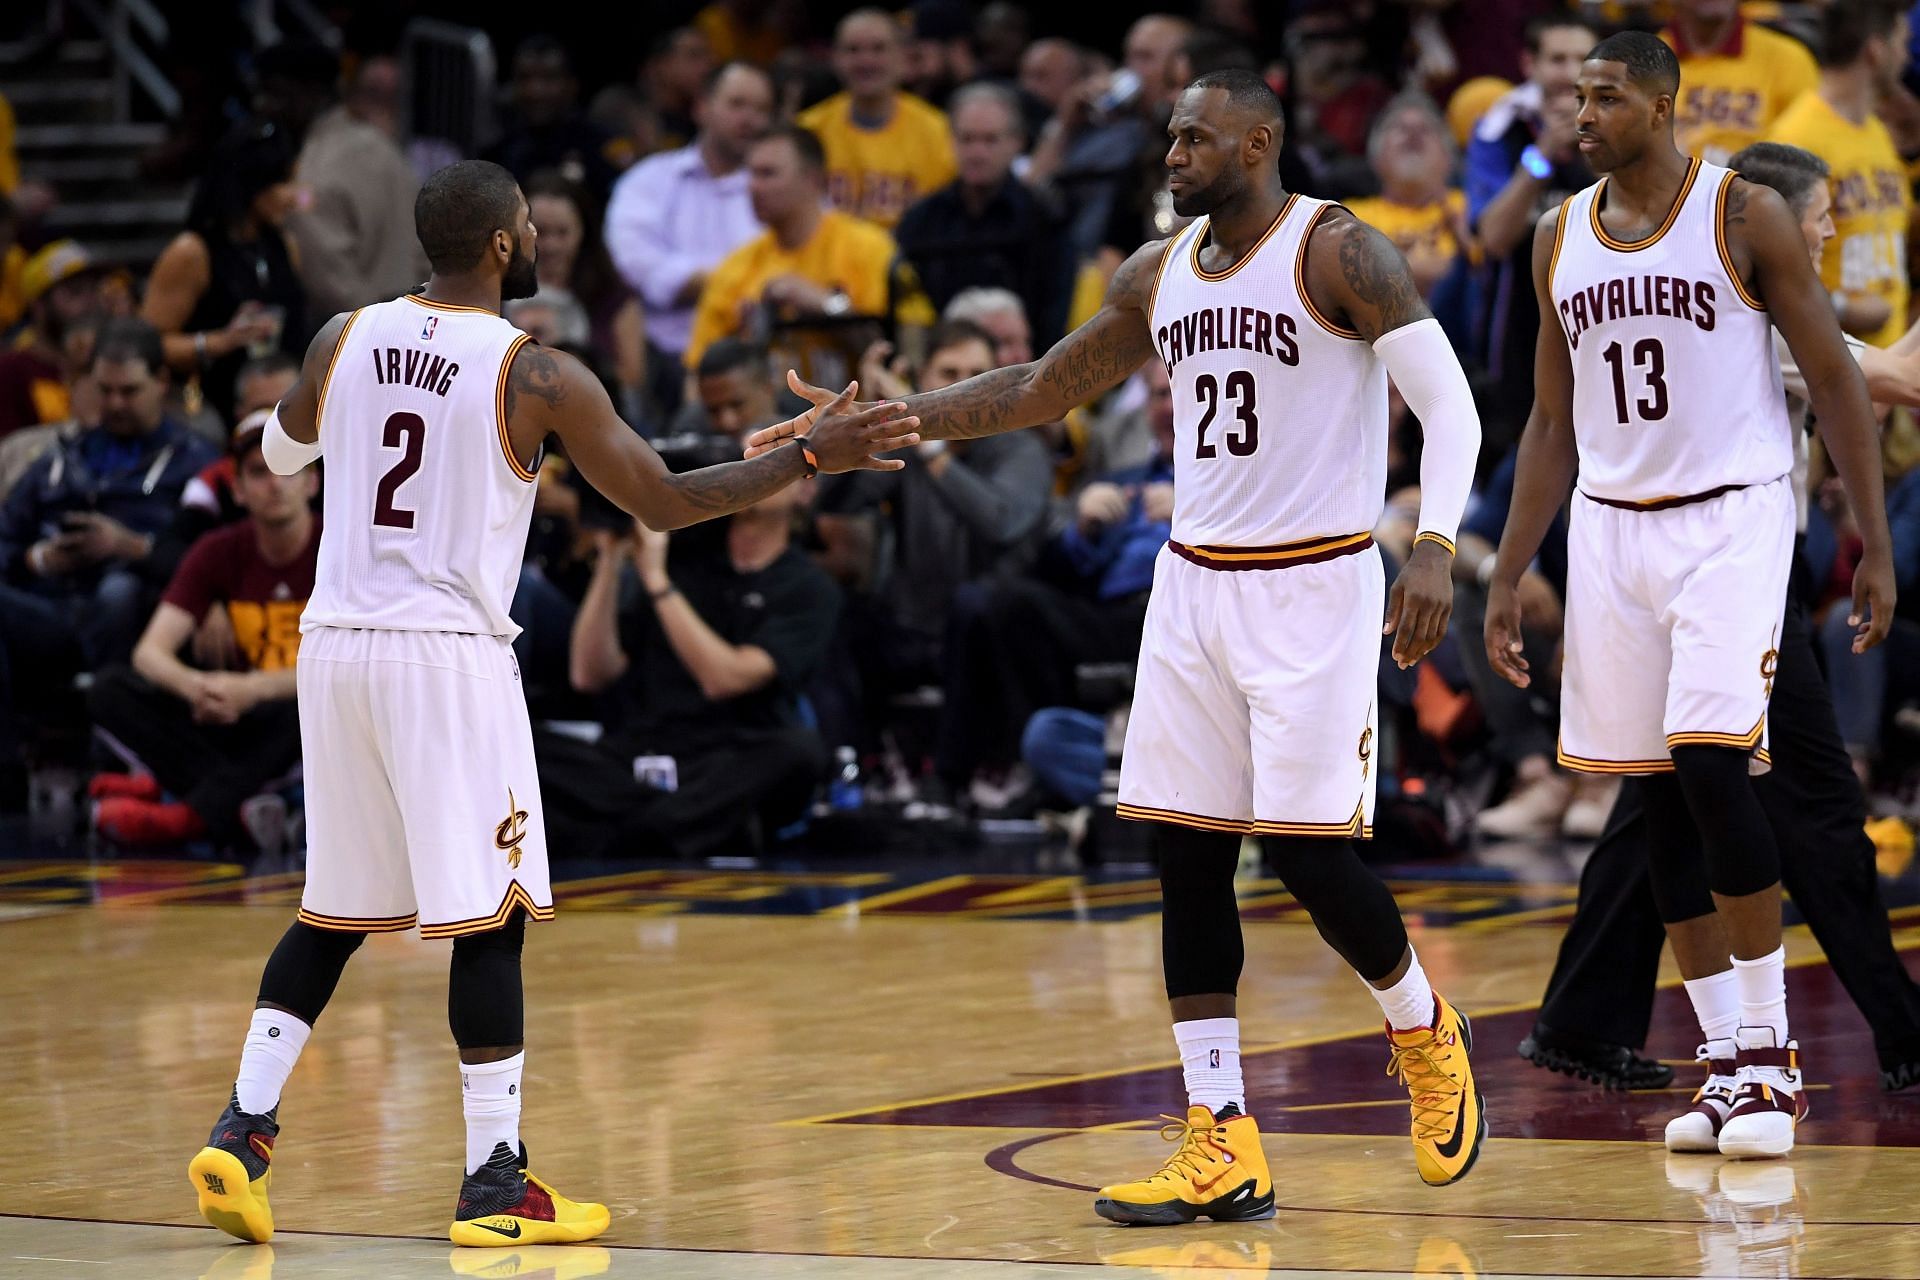 LeBron James and Kyrie Irving were fantastic together (Image via Getty Images)